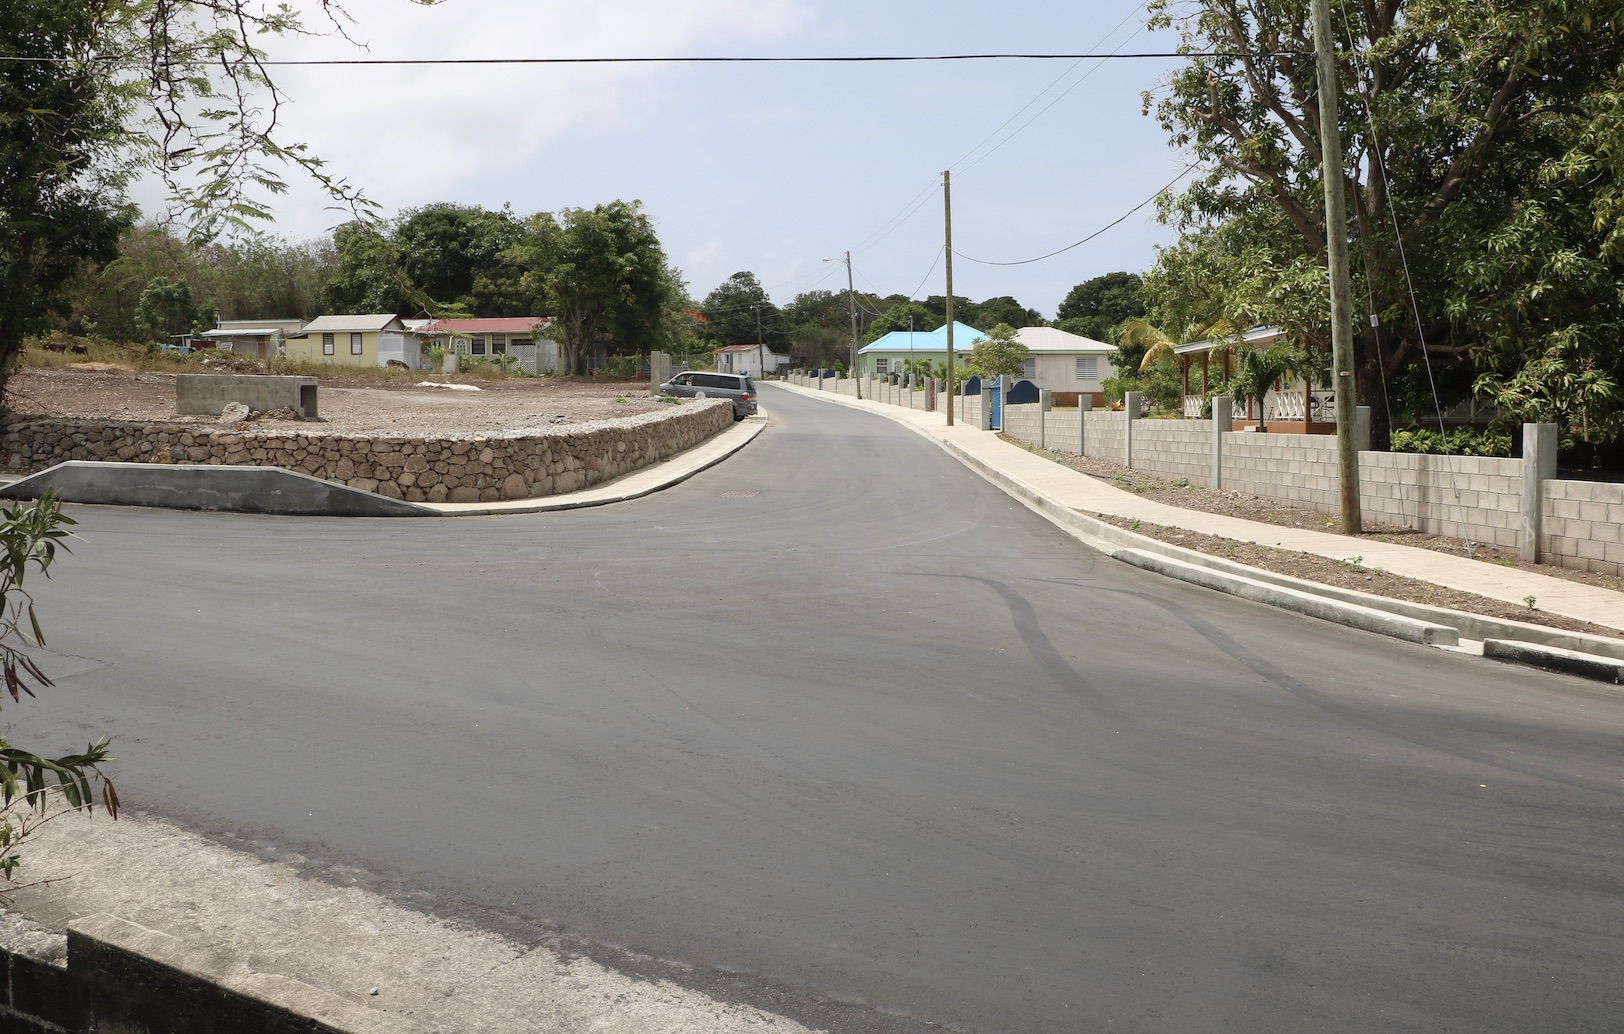 The newly reconstructed entrance of Brown Hill Road under the ongoing Brown Hill Road Rehabilitation Project